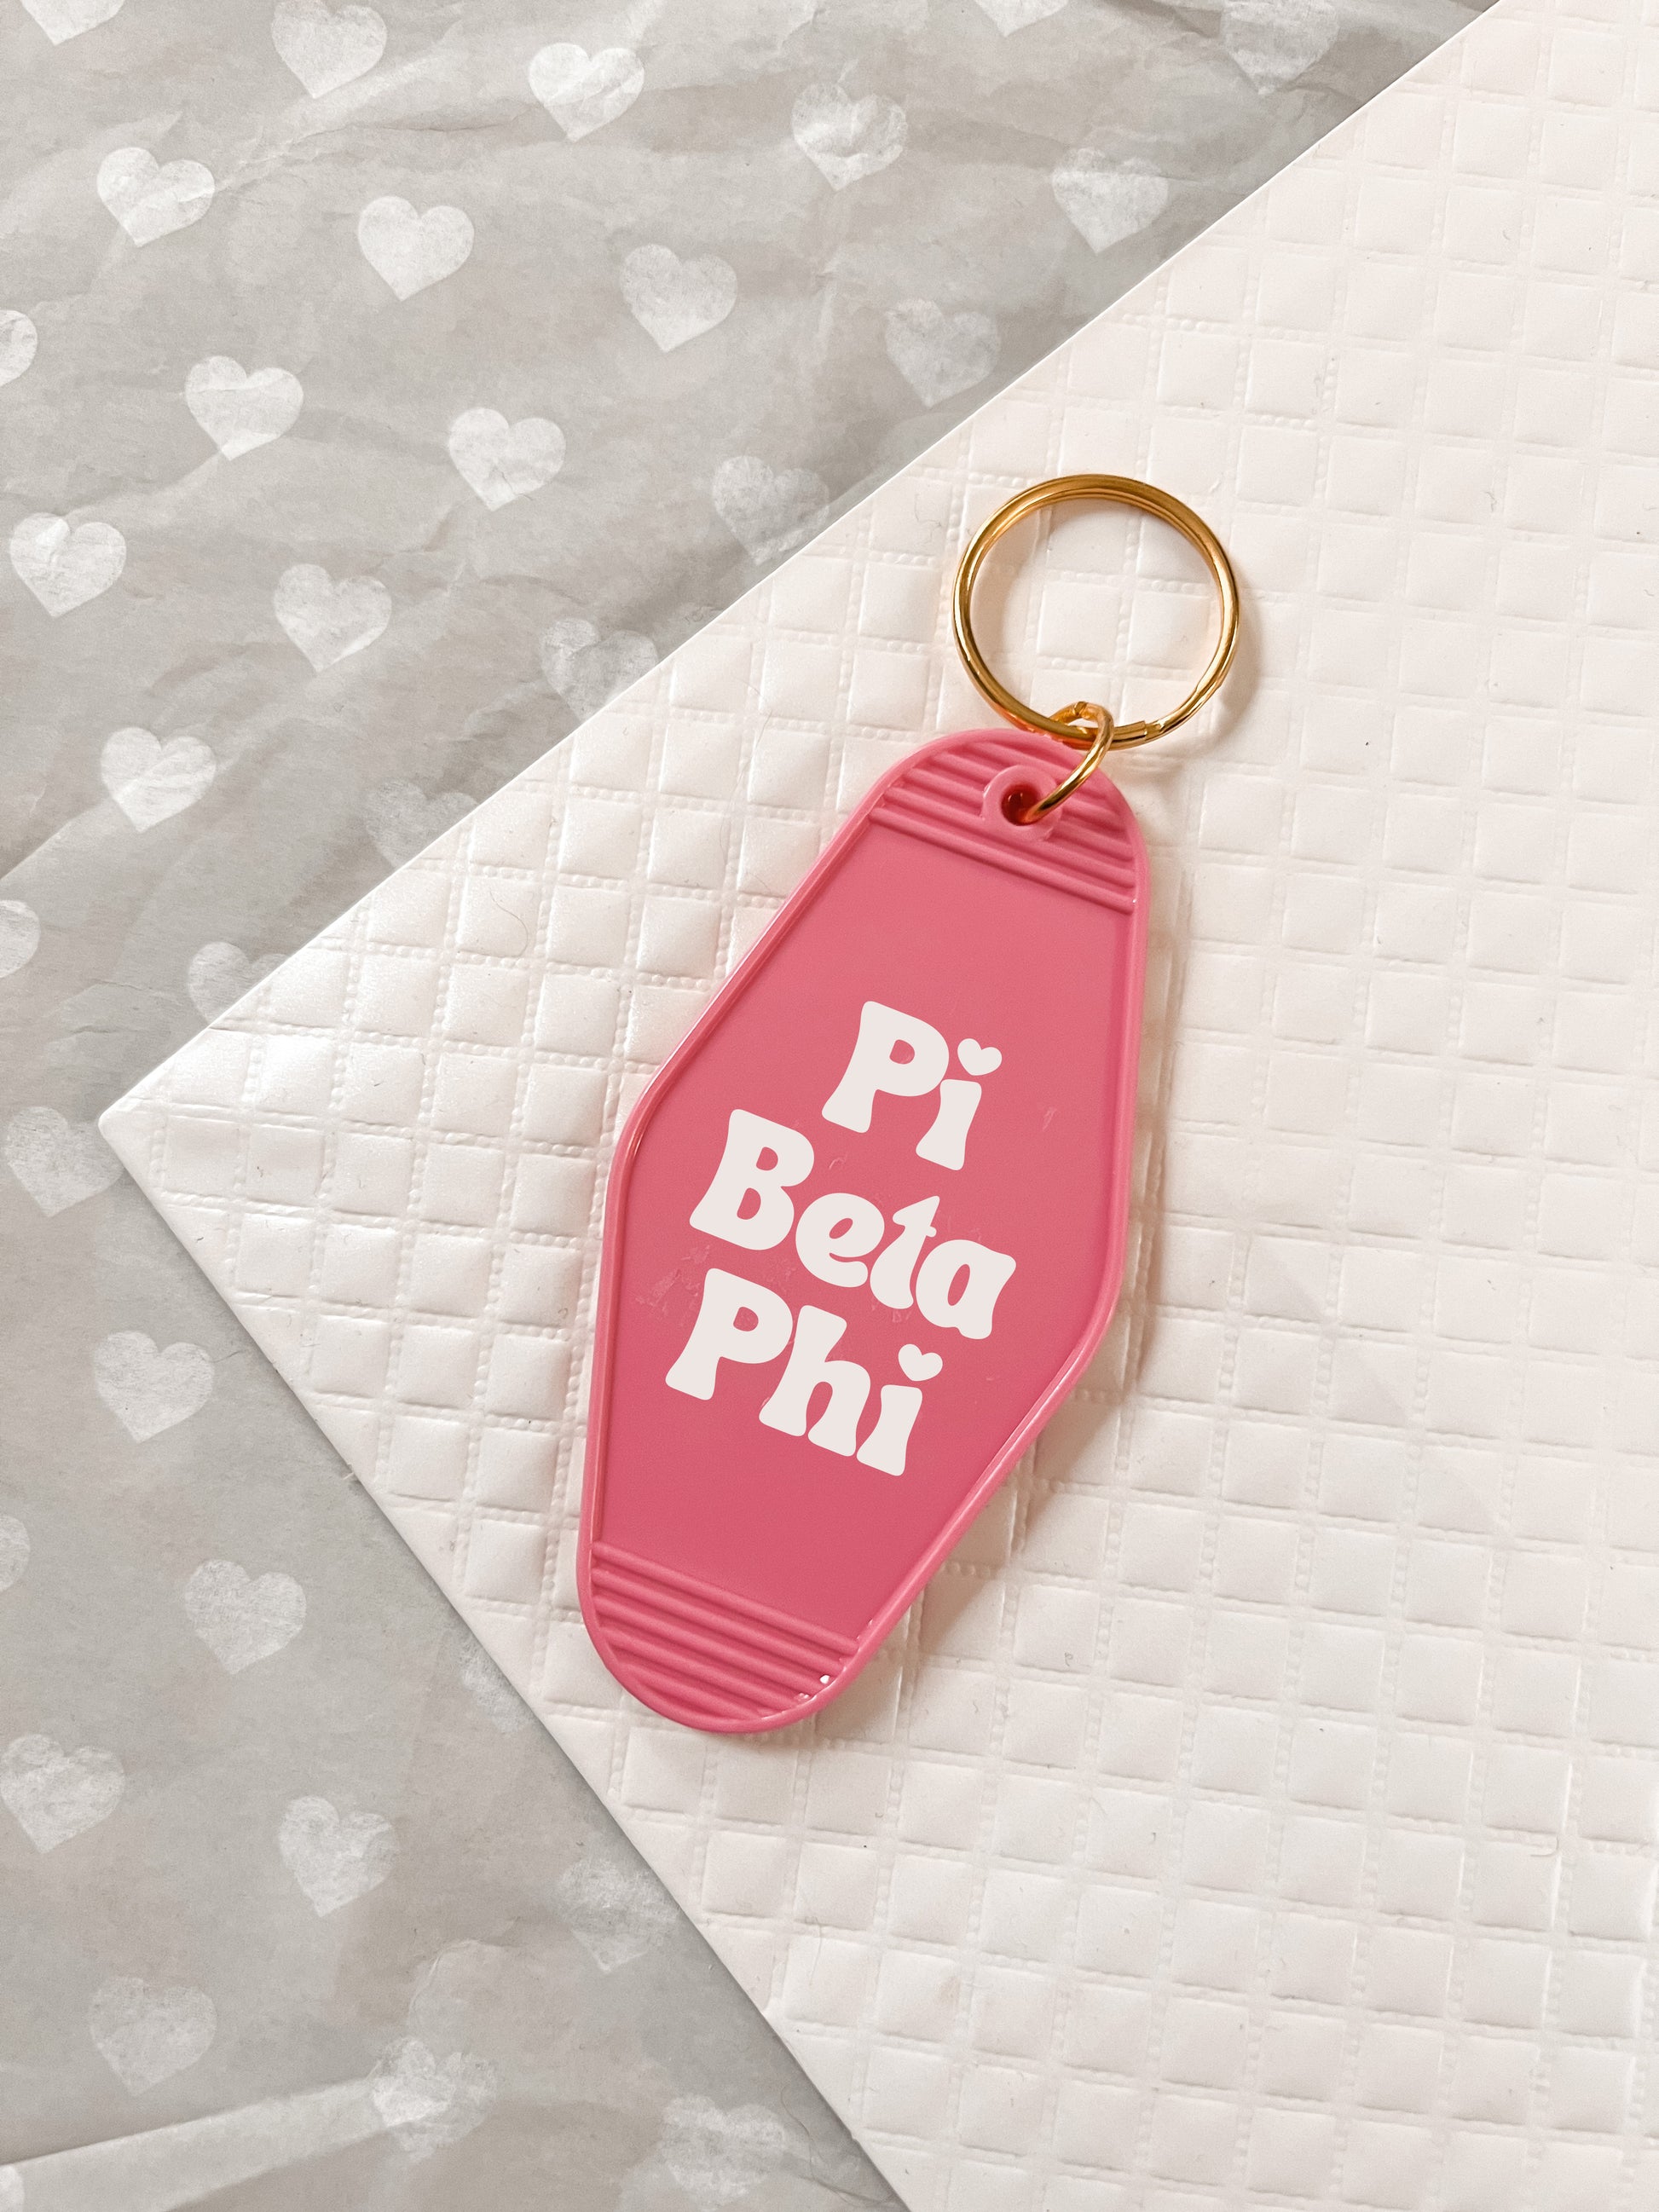 Pi Beta Phi Motel Hotel Key Chain in Hot pink with white letters and gold ring. PiPhi